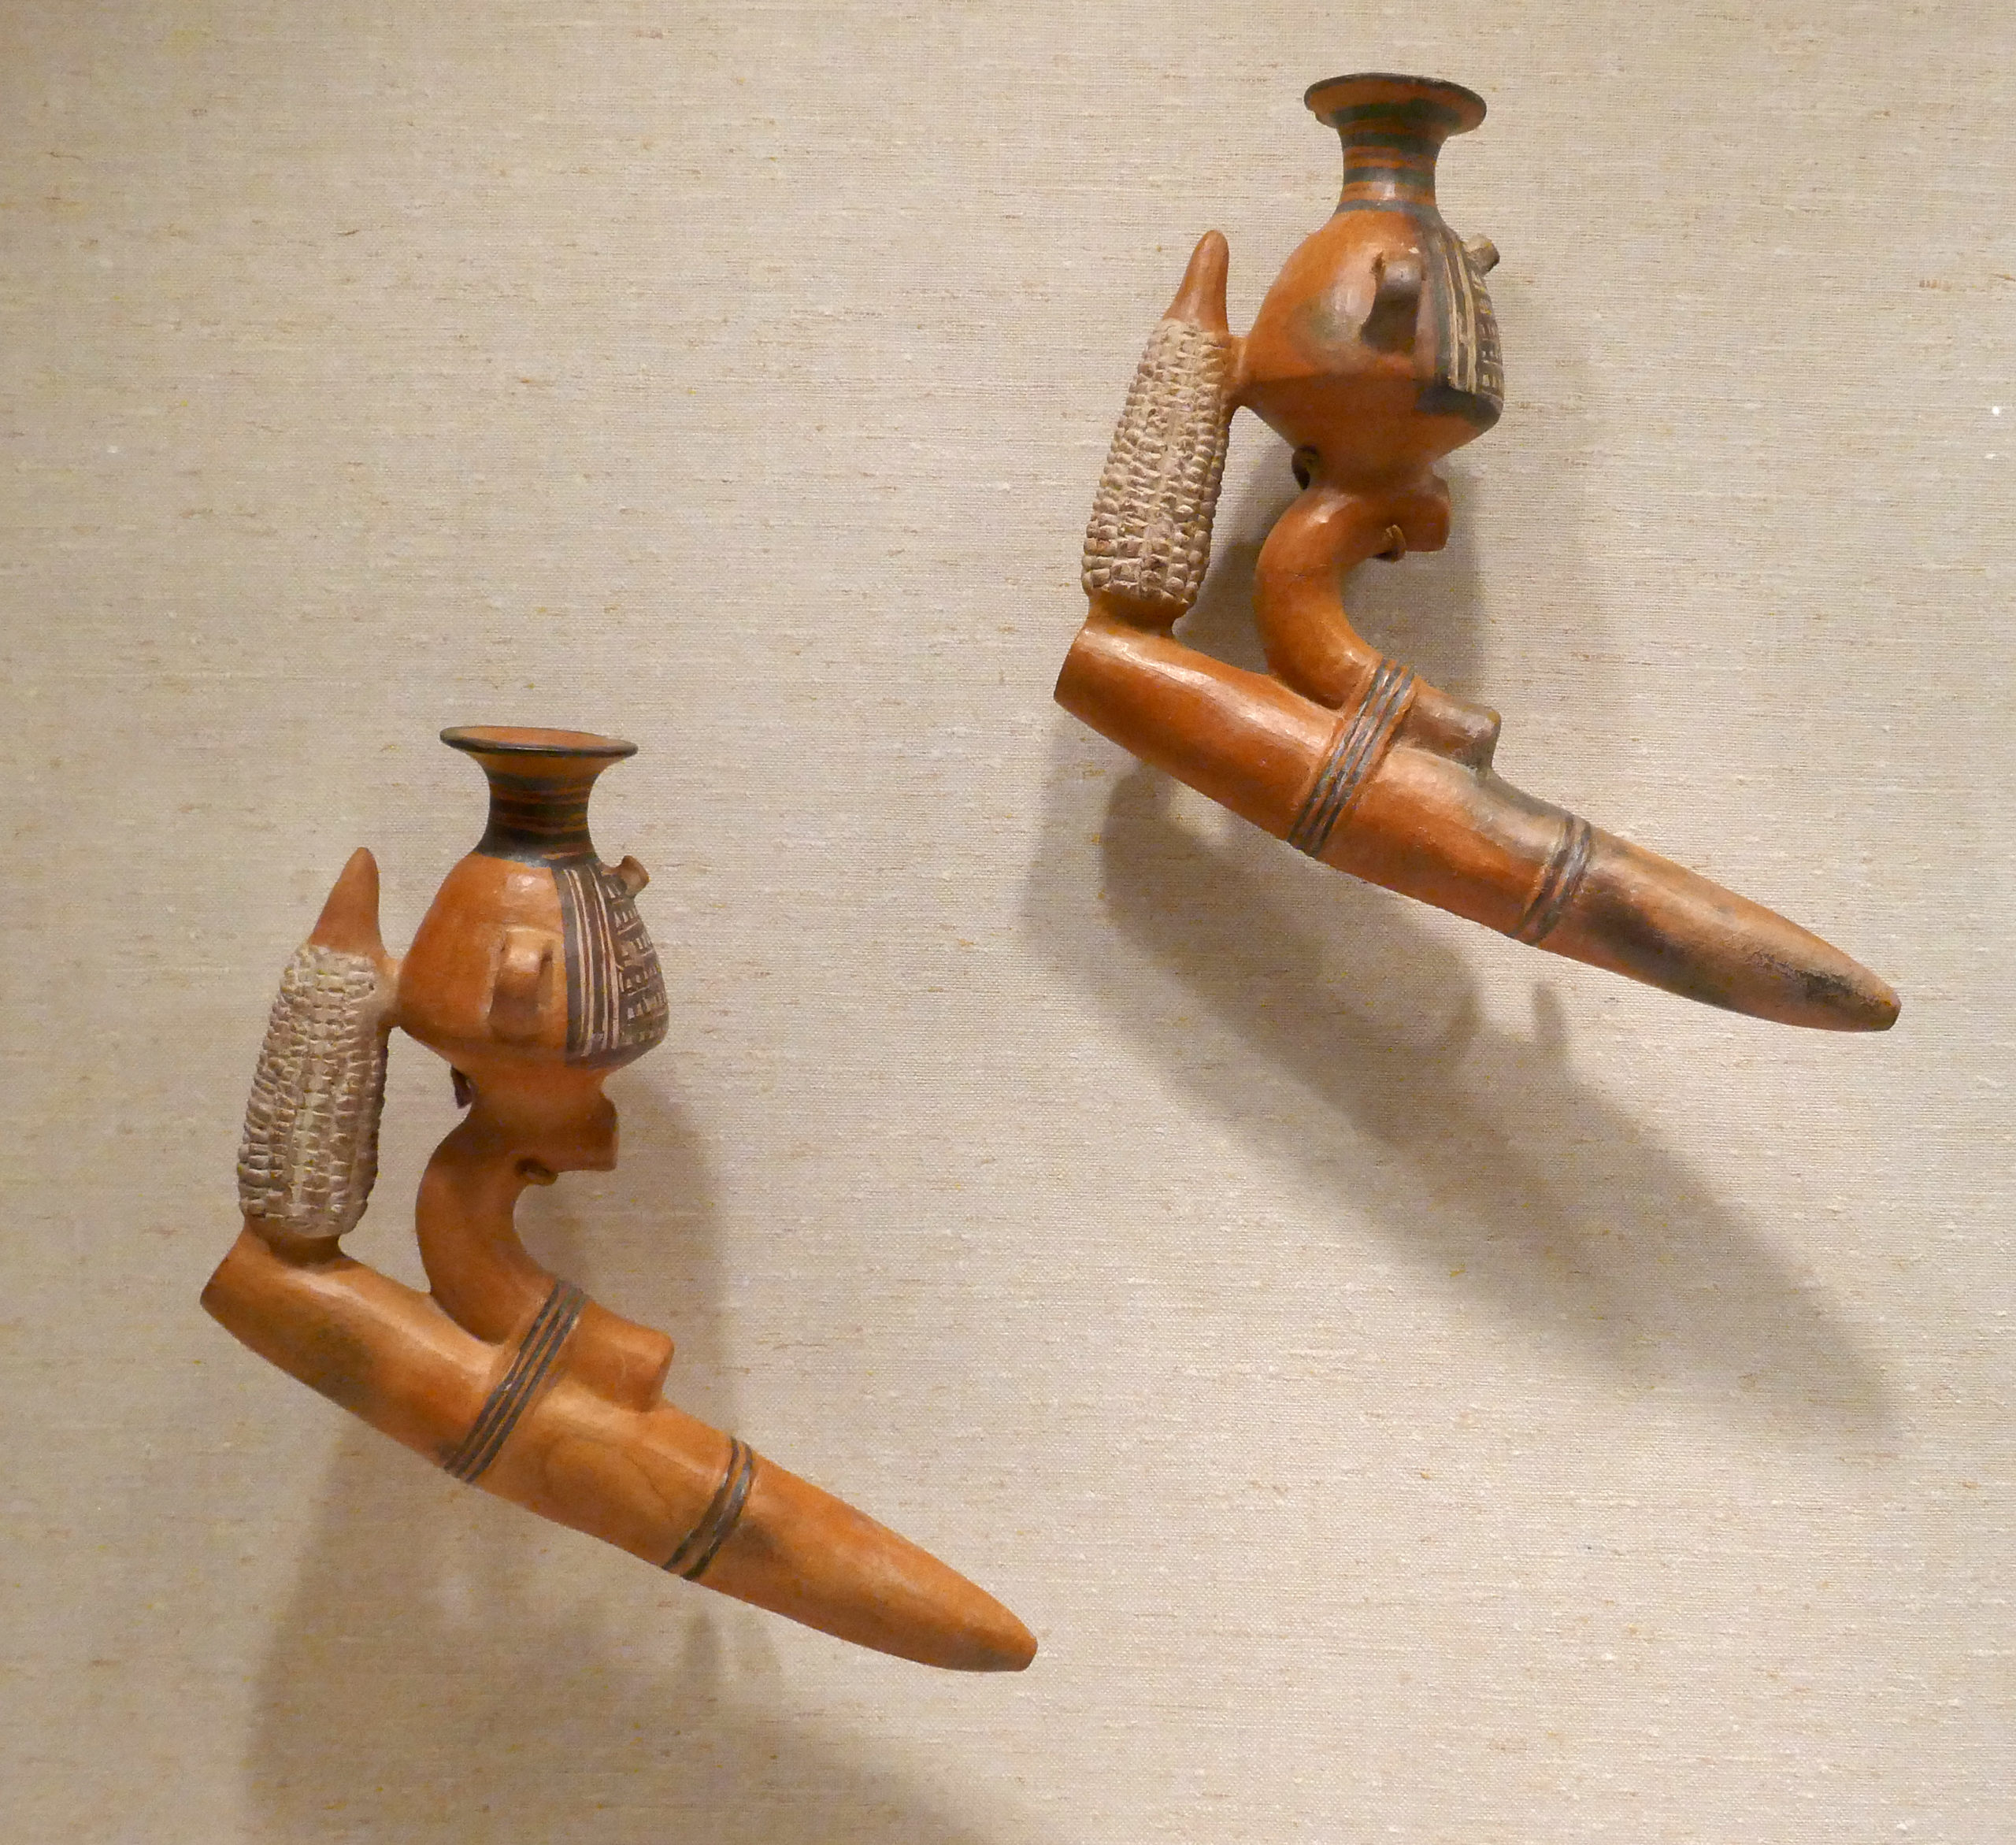 A pair of pacchas with taclla, urpu, and maize imagery, The Metropolitan Museum of Art (photo: Dr. Lisa Trever, CC BY-SA-NC 4.0)